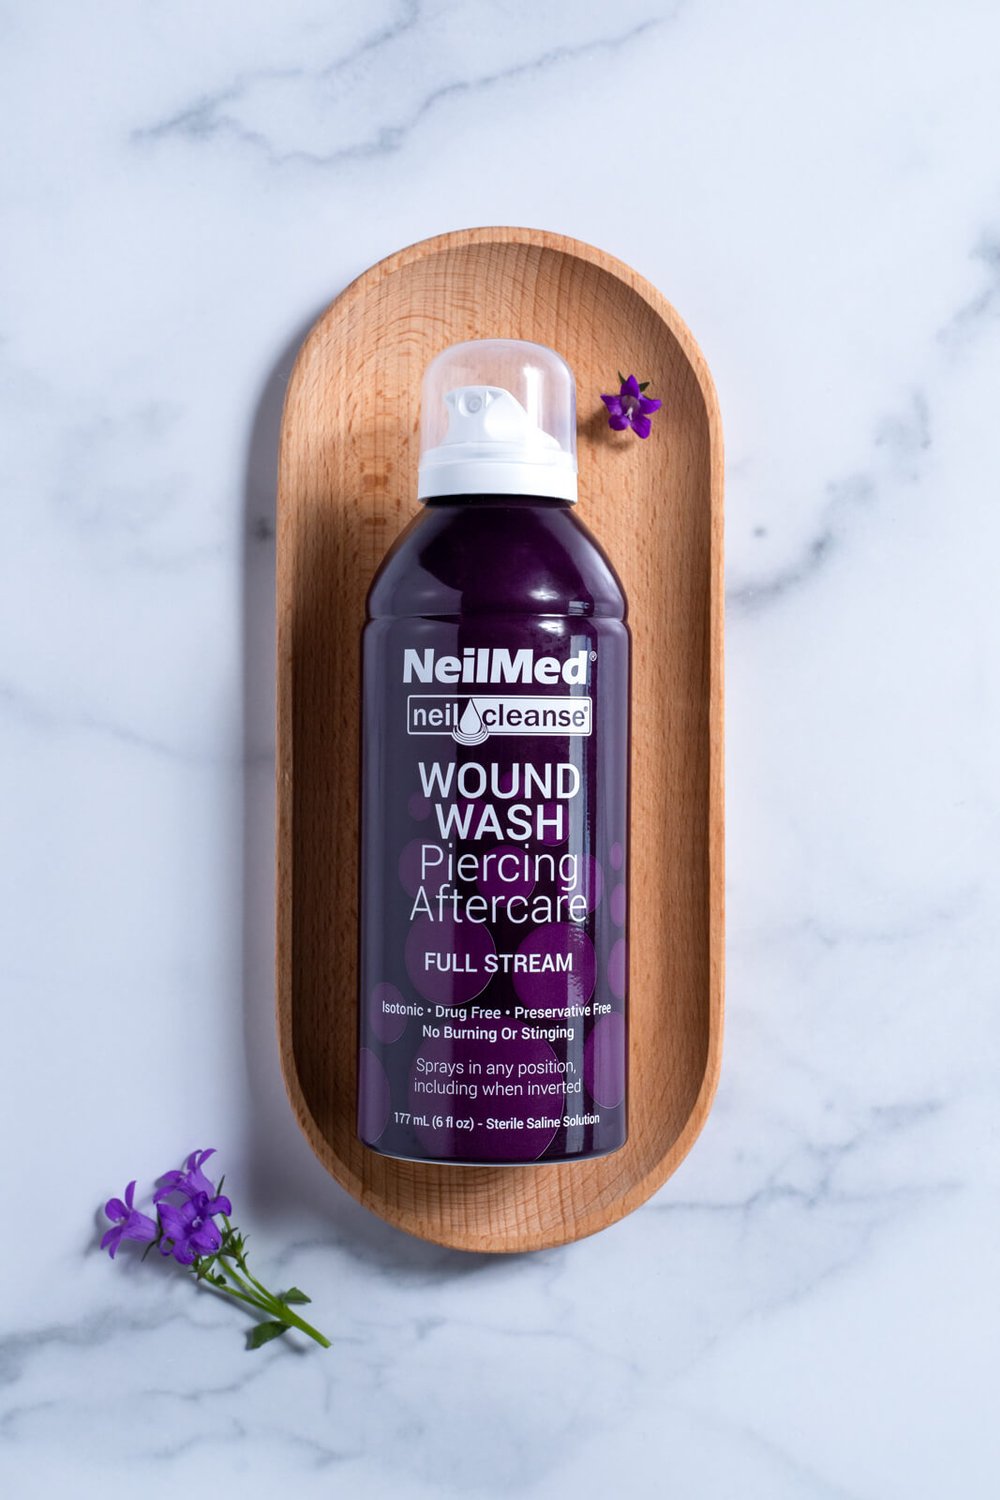 neilmed piercing and aftercare full stream on wood background with purple flowers